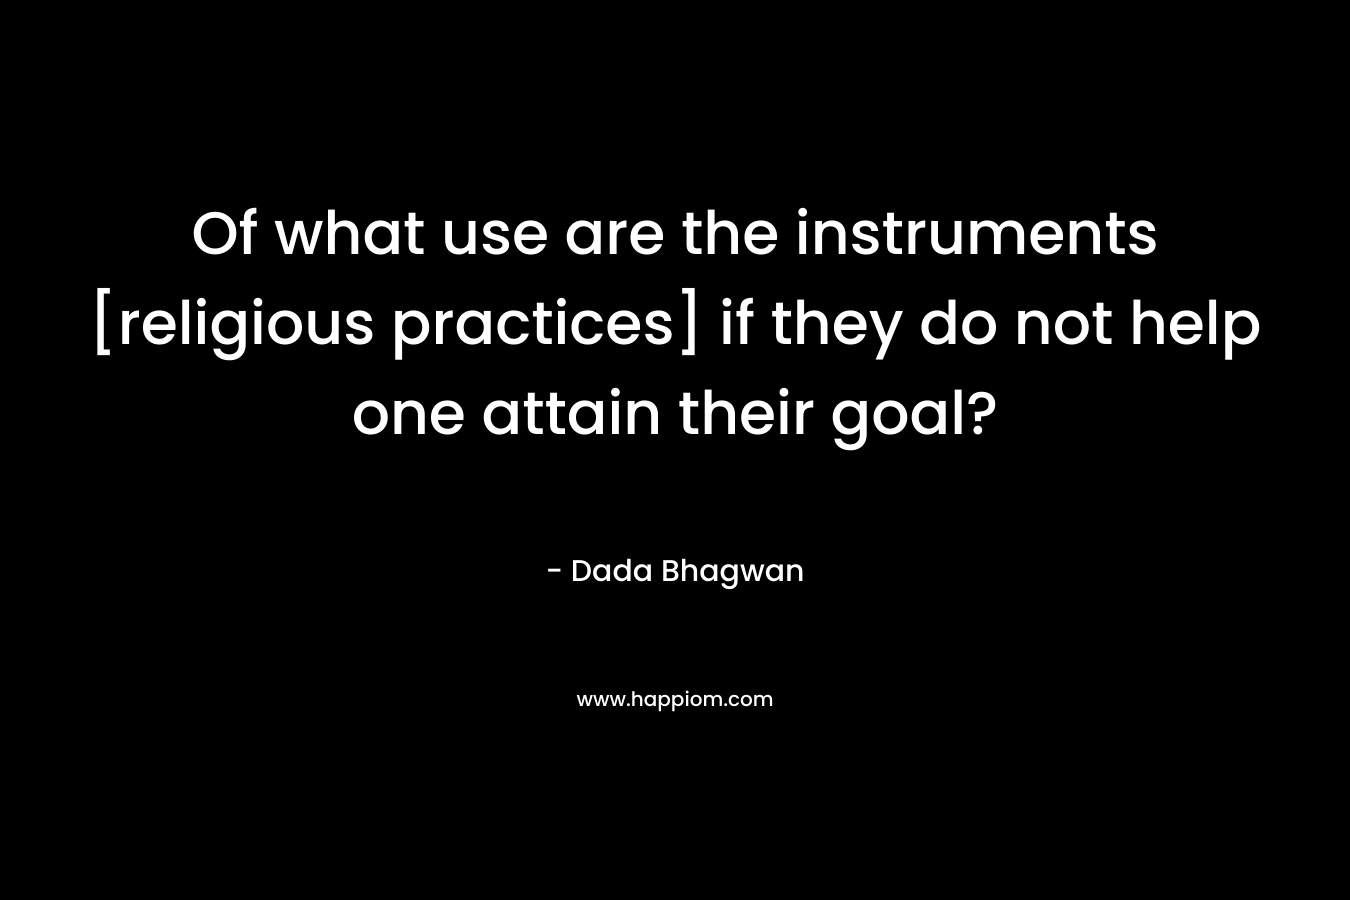 Of what use are the instruments [religious practices] if they do not help one attain their goal?